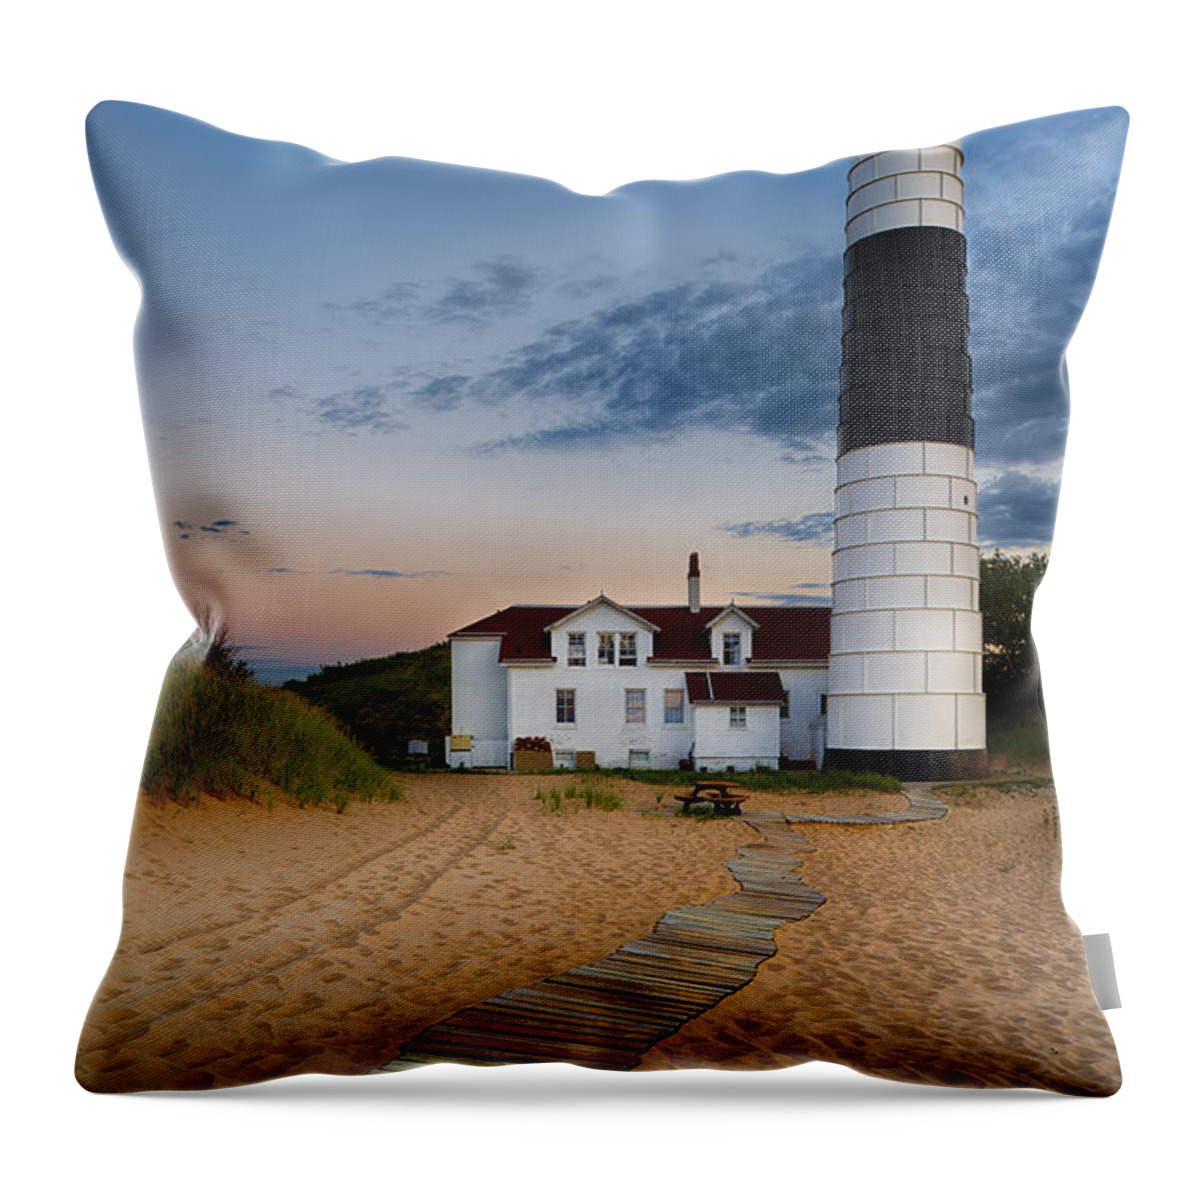 Dusk Throw Pillow featuring the photograph Big Sable Point Lighthouse by Sebastian Musial